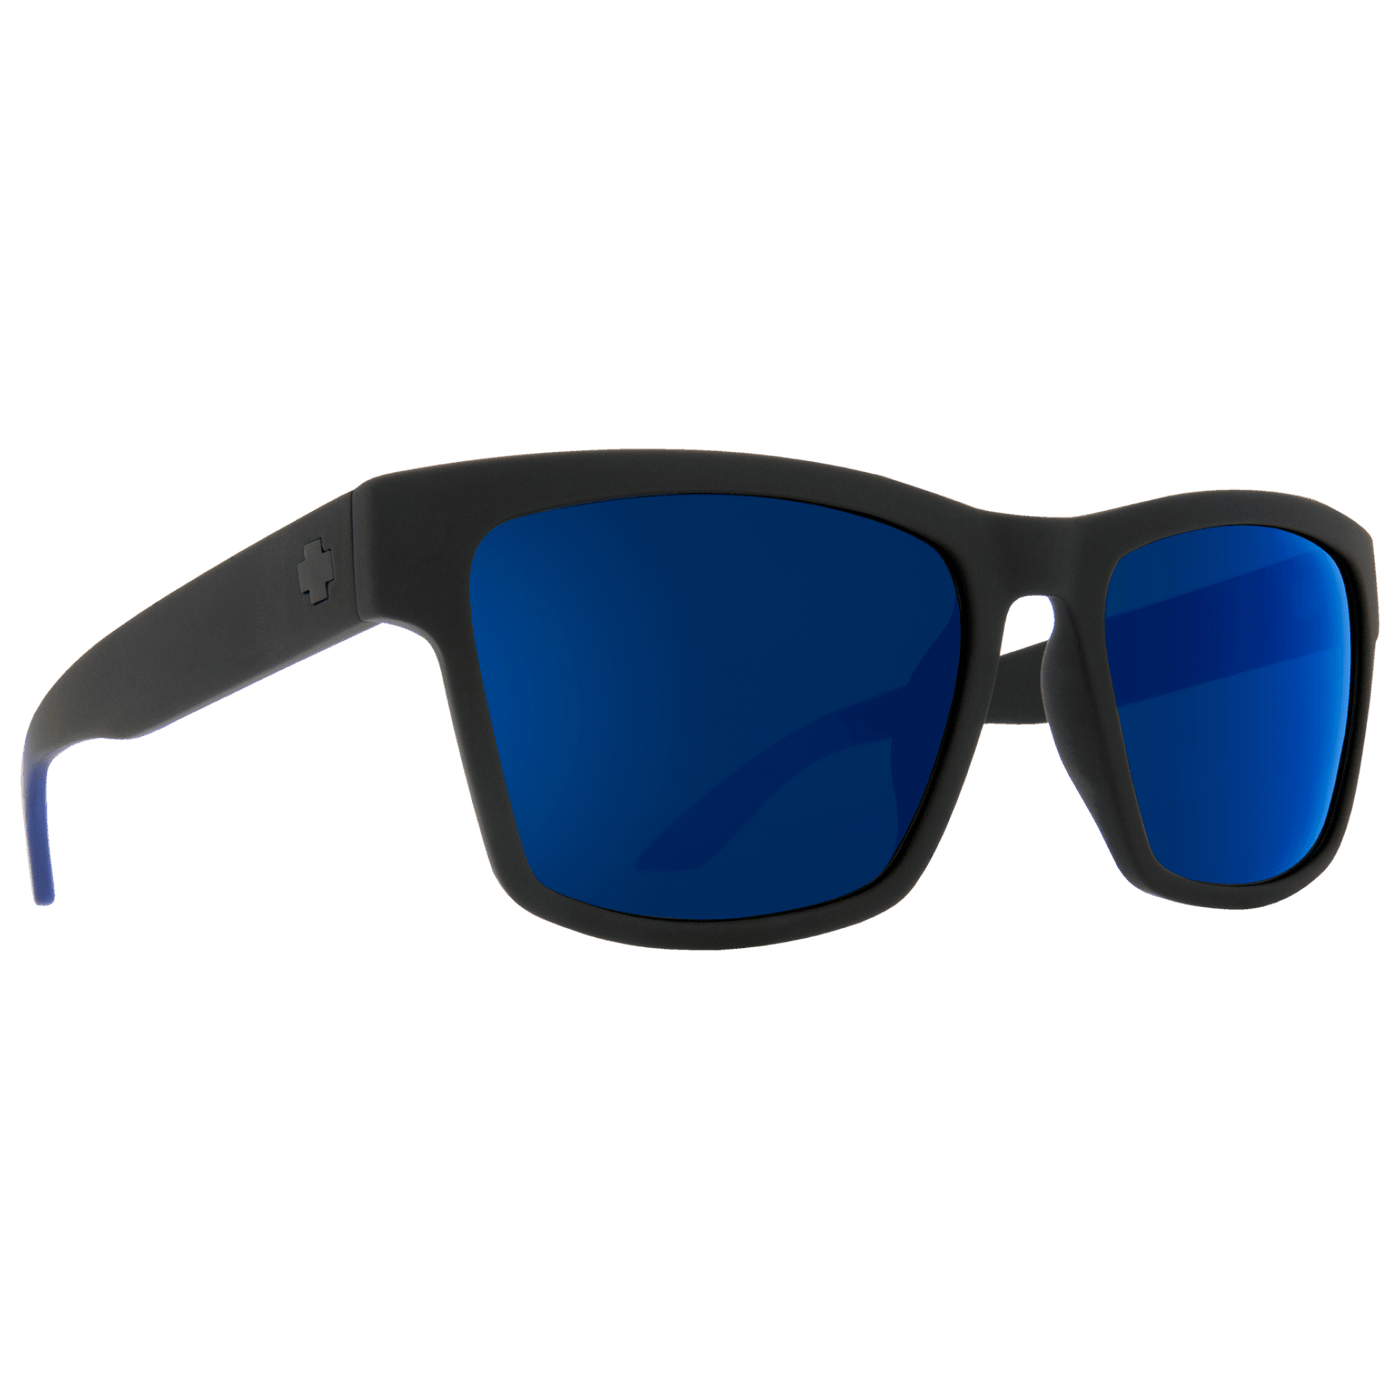 SPY HAIGHT 2 Sunglasses, Happy Lens - Blue 8Lines Shop - Fast Shipping